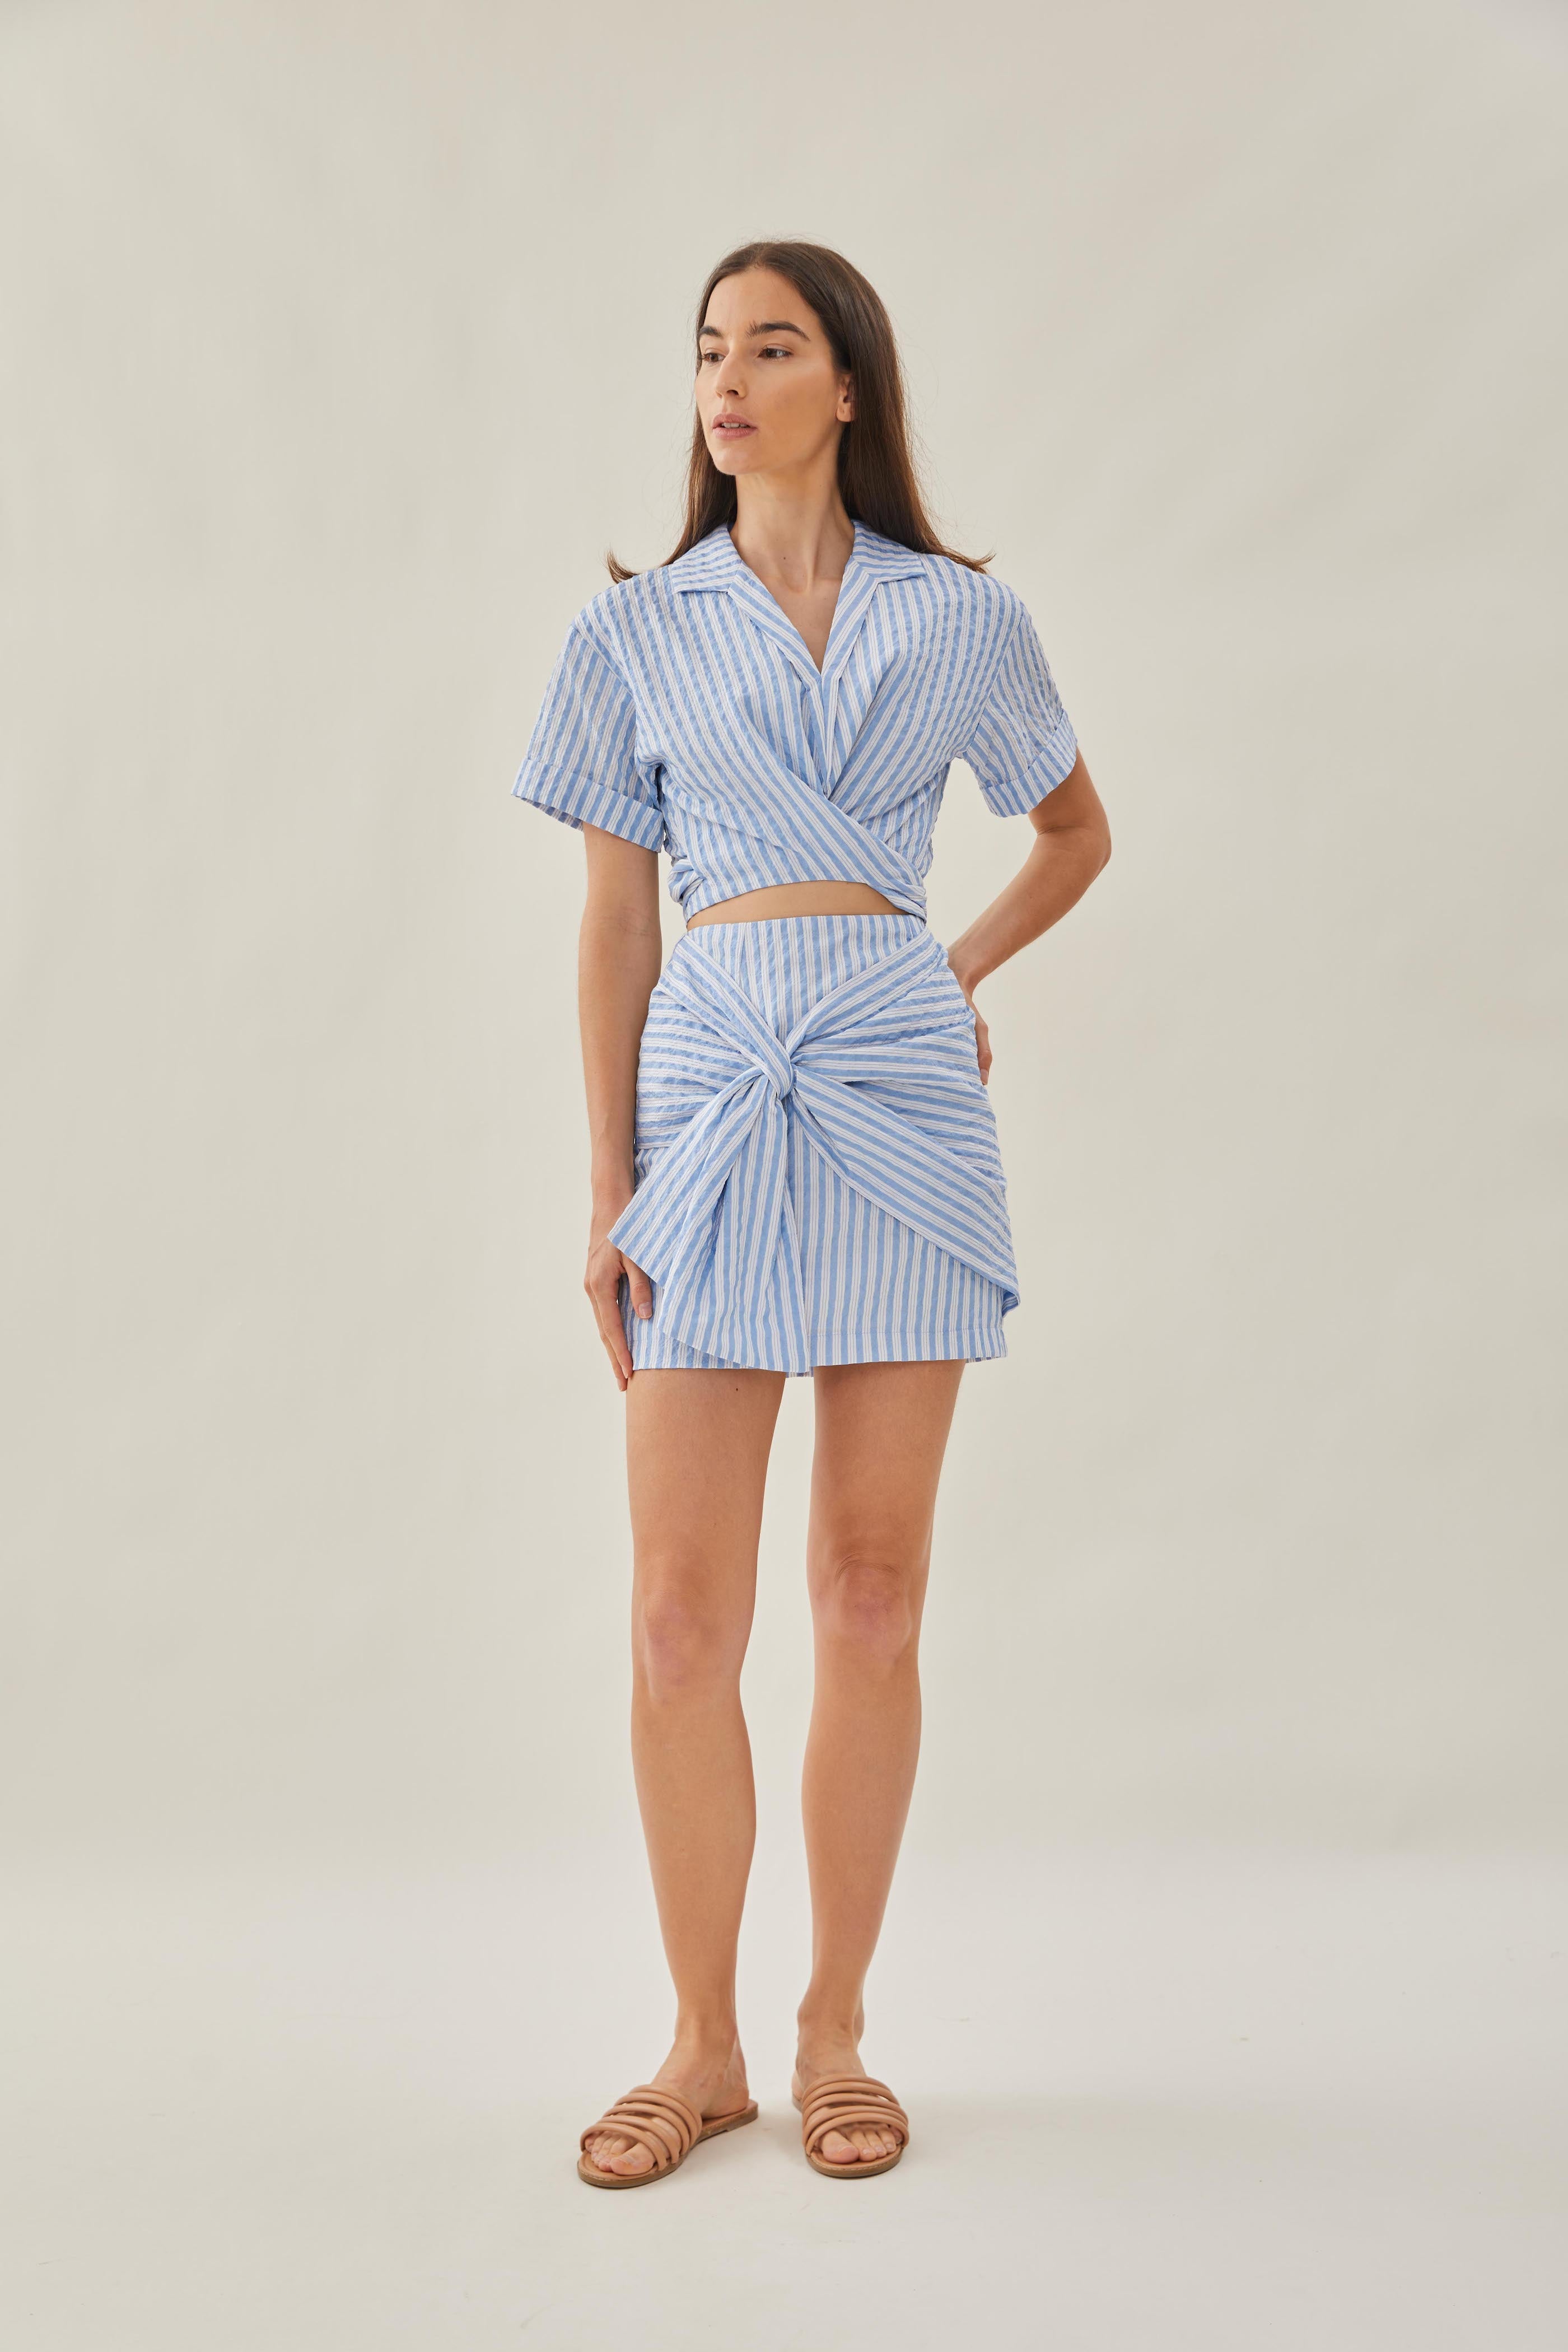 Knotted Mini Skirt in Stripe Blue